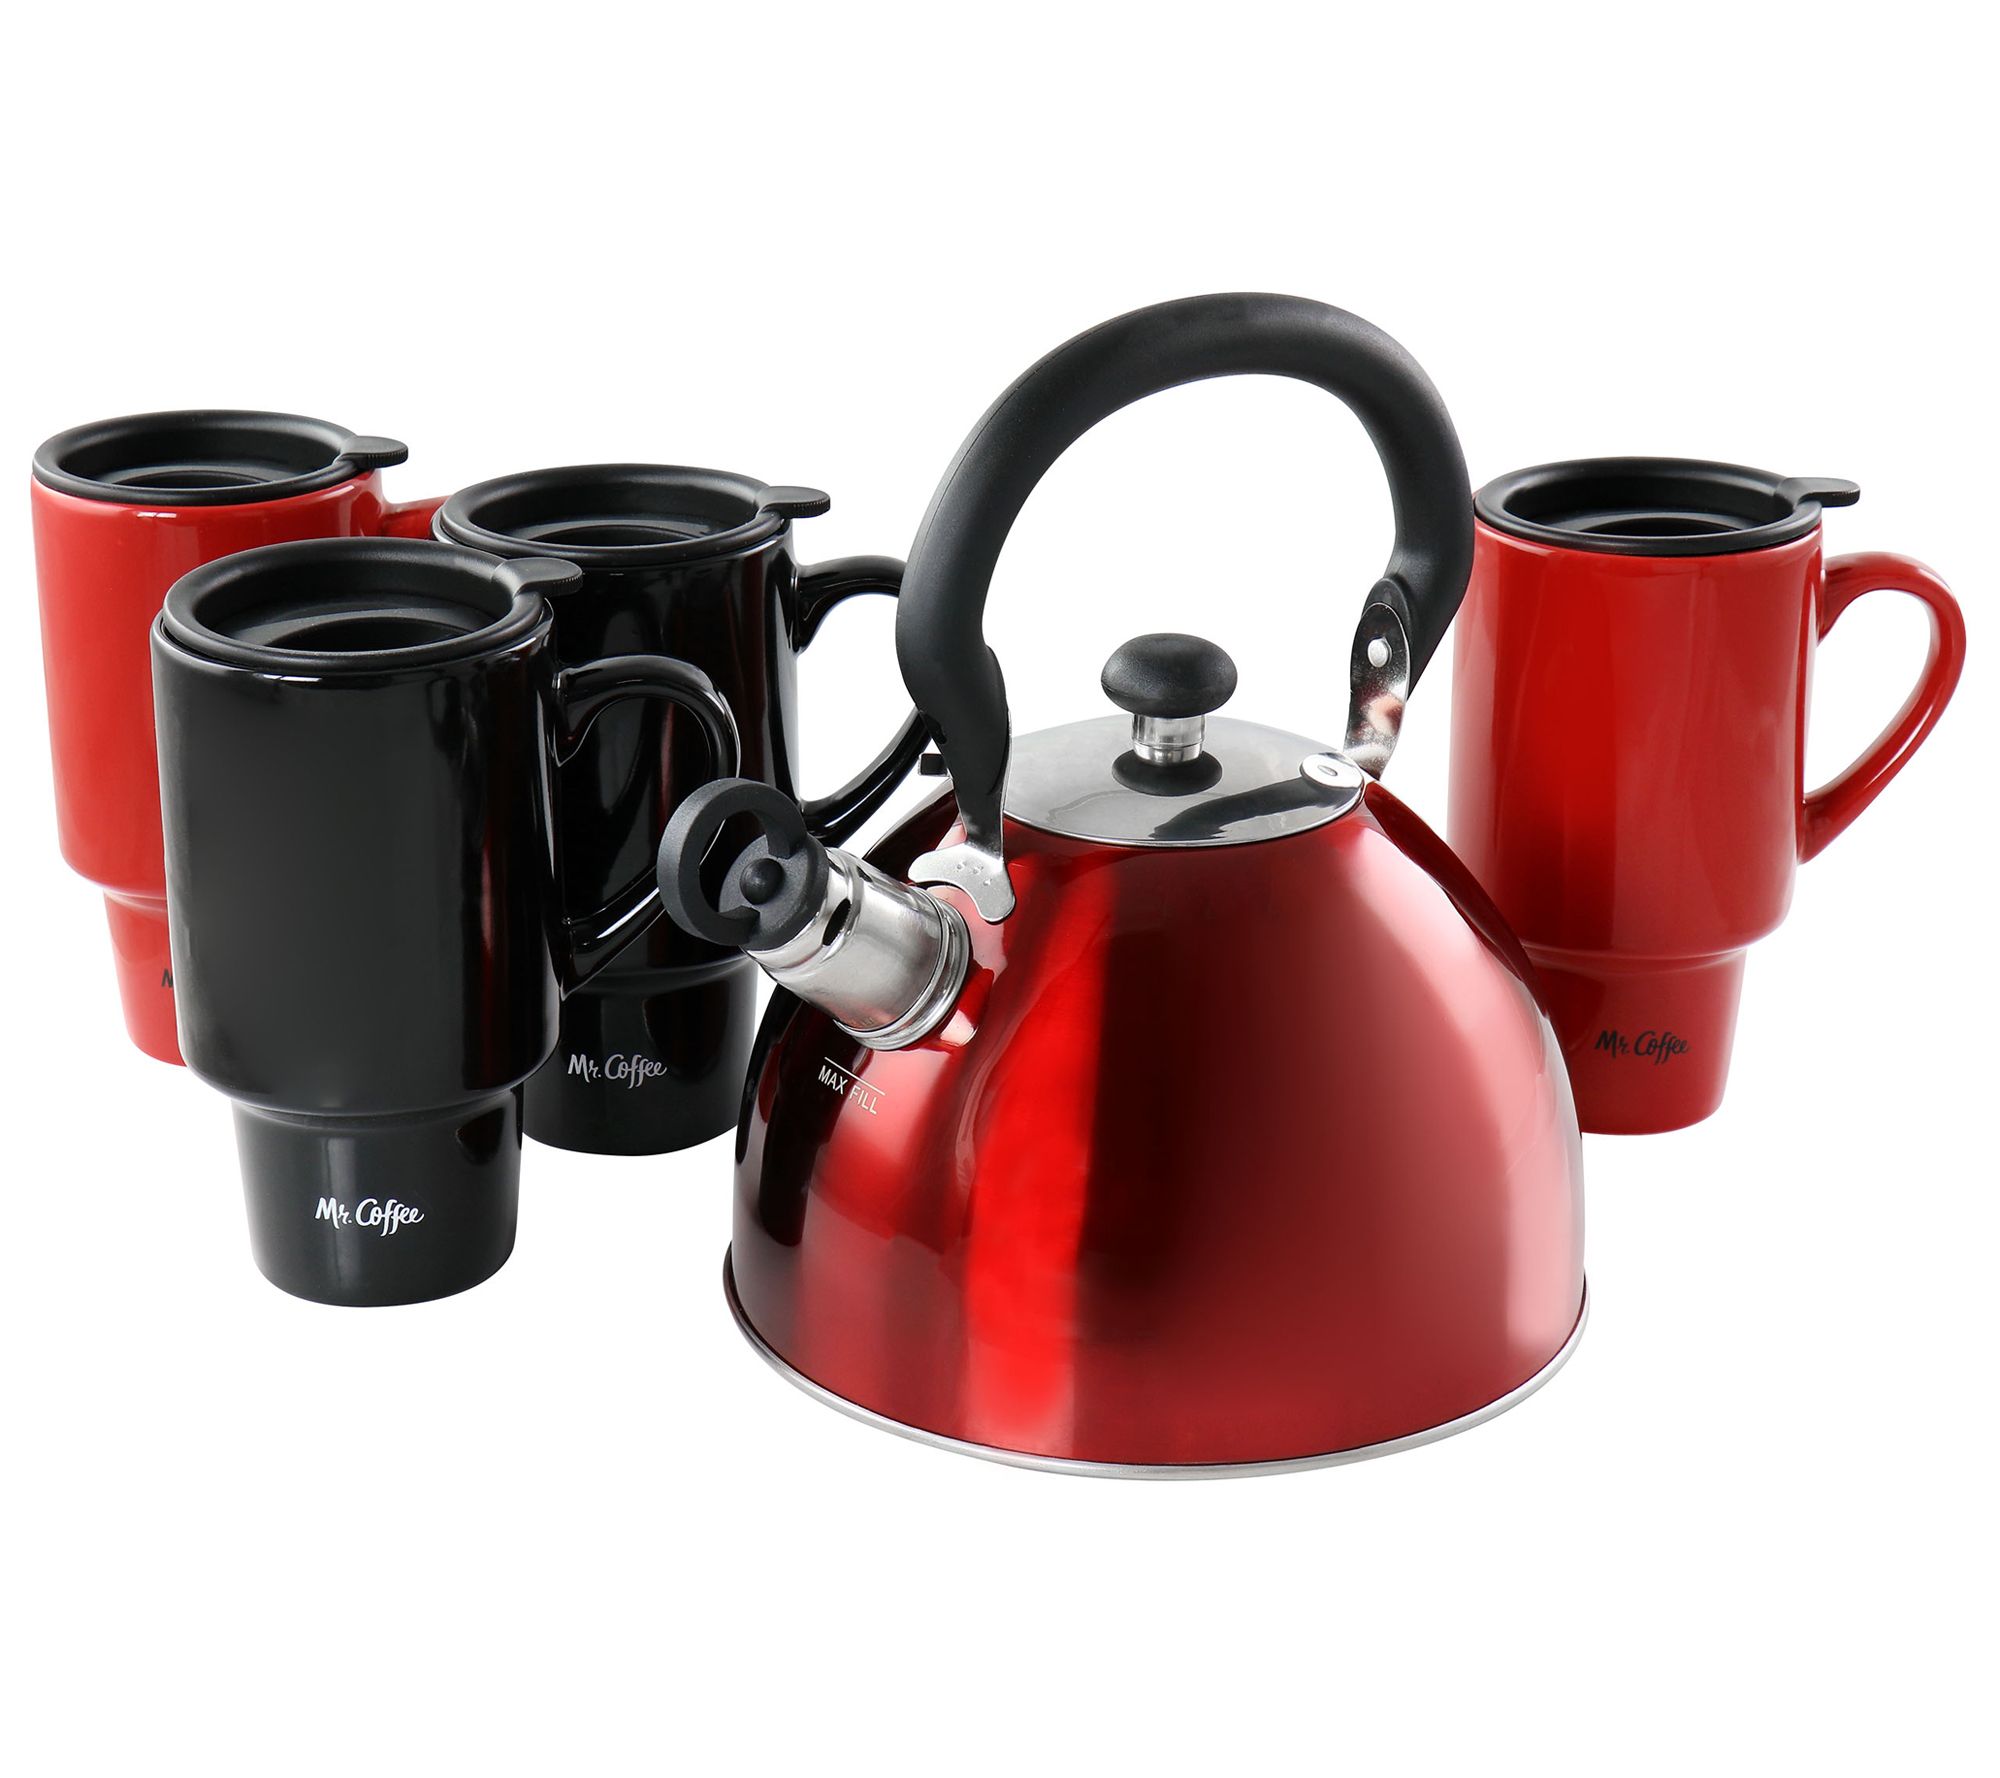 Personal Size Stovetop Kettle Smoker